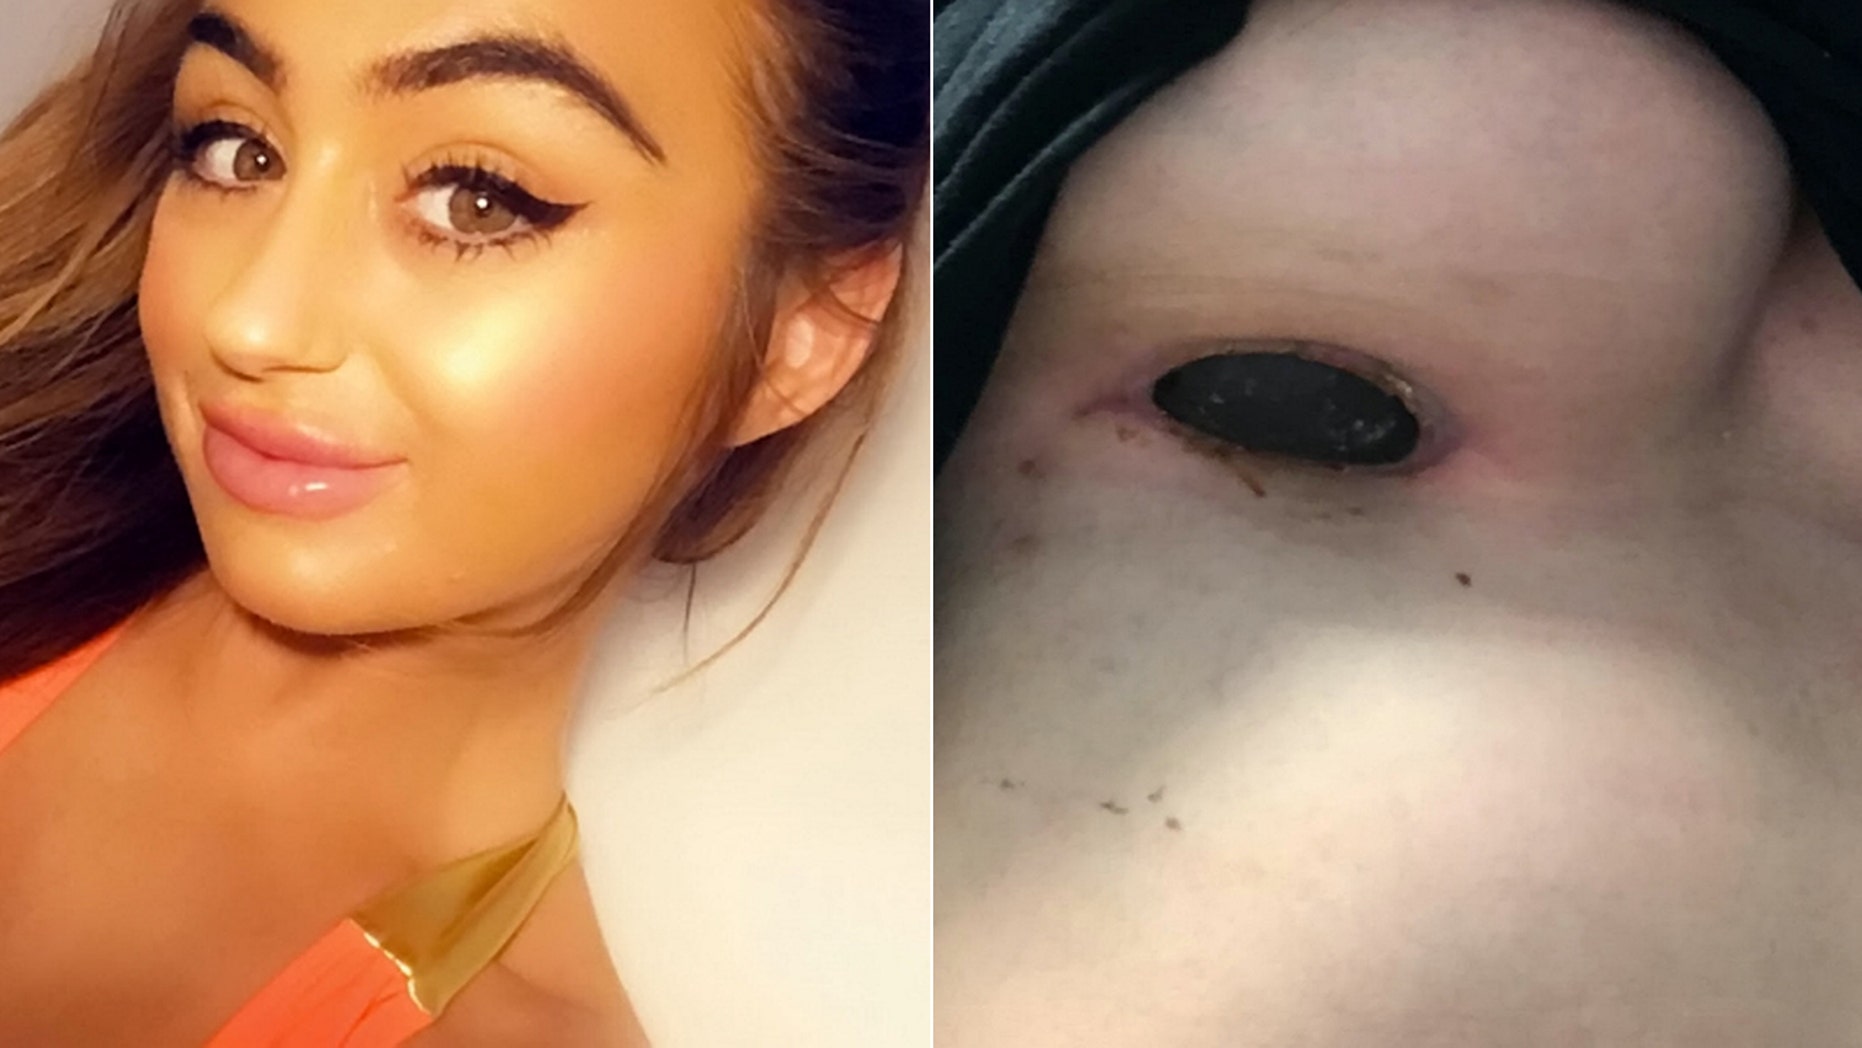 Woman Claims Implant Scar Smelled Like Rotten Meat After Botched Procedure Abroad